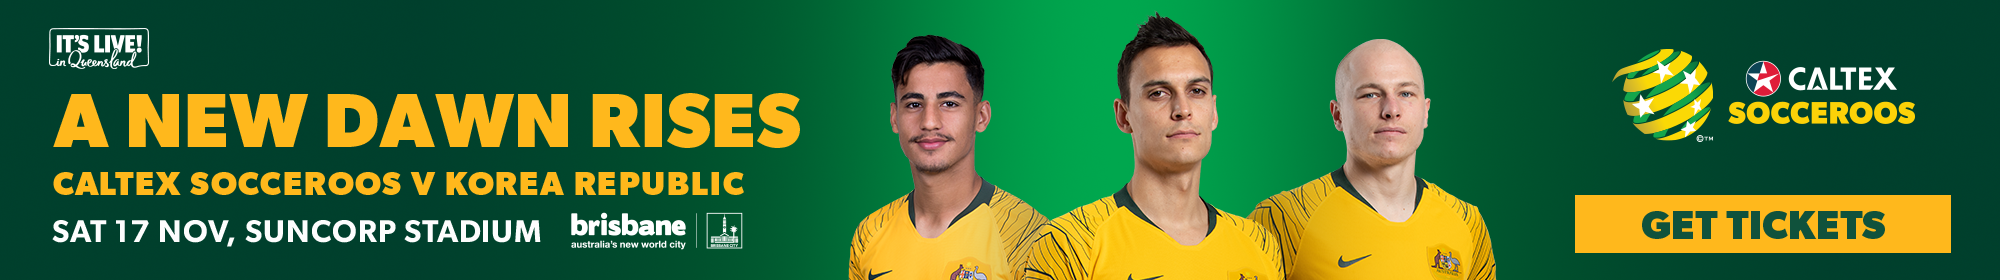 Secure your Caltex Socceroos tickets!